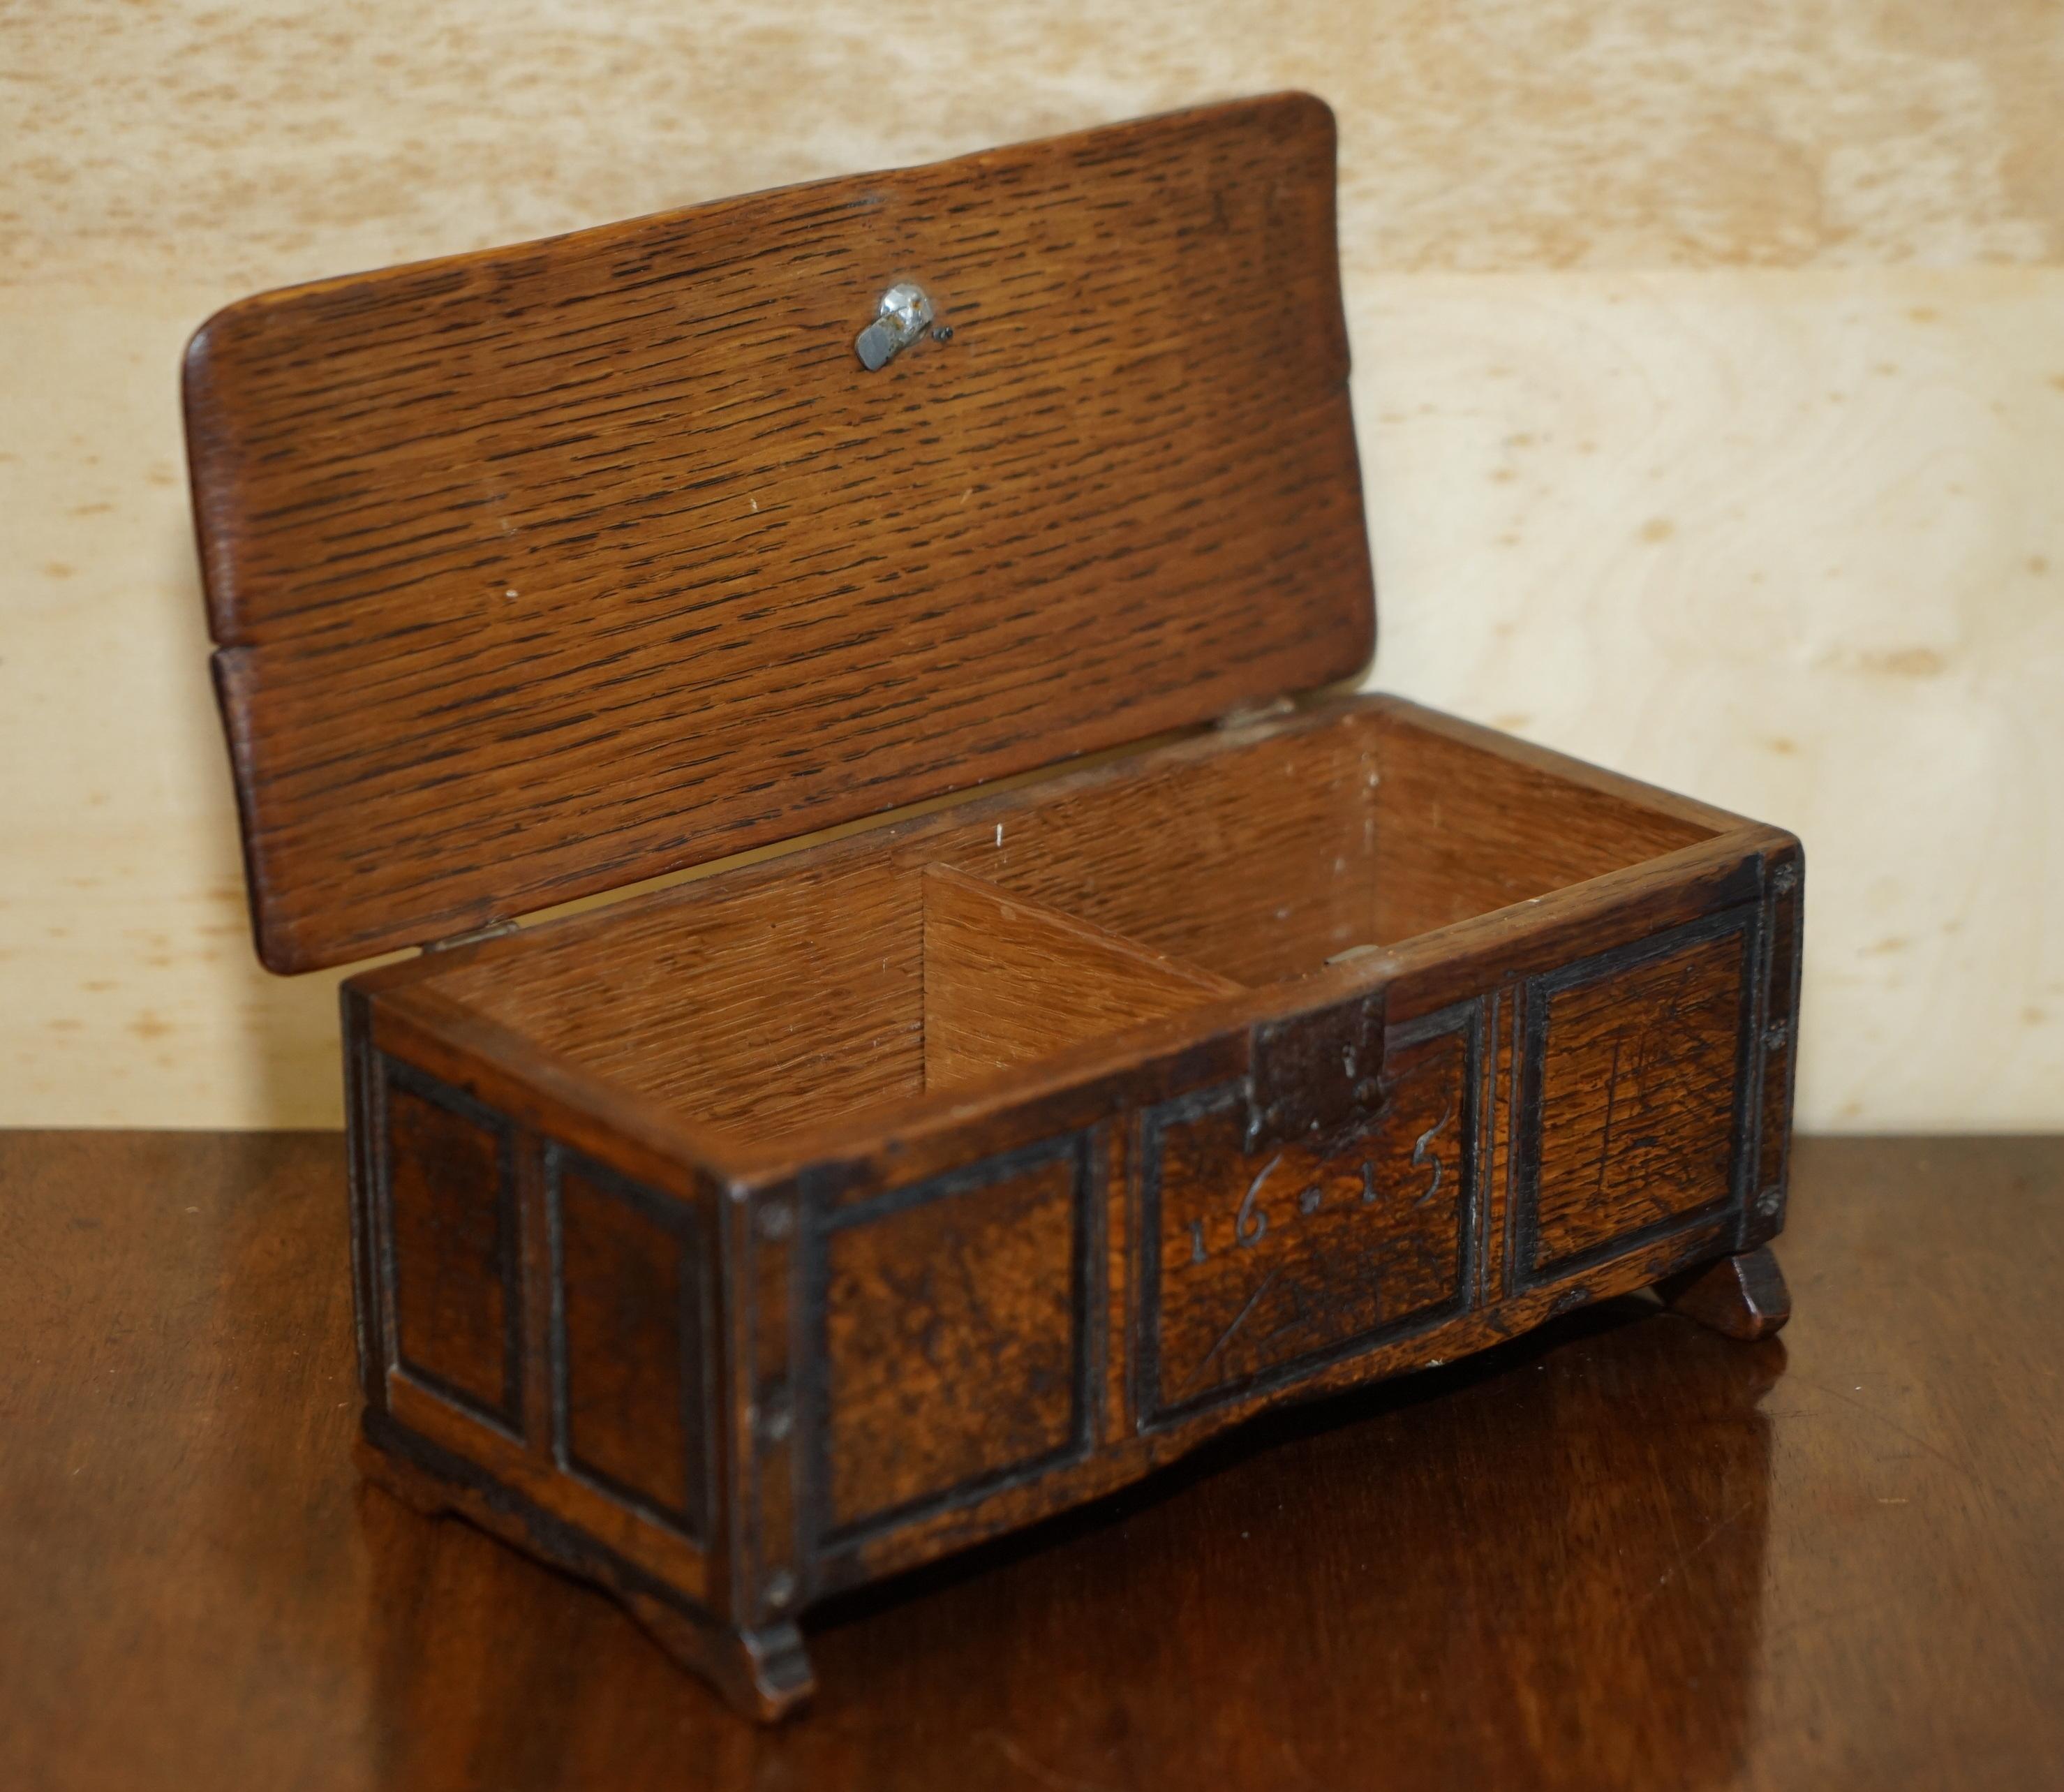 MINATURE 1615 DATED CARVED COFFER SIX PLANK CHEST DOLLS HOUSE ANTiQUE FURNITURE 6